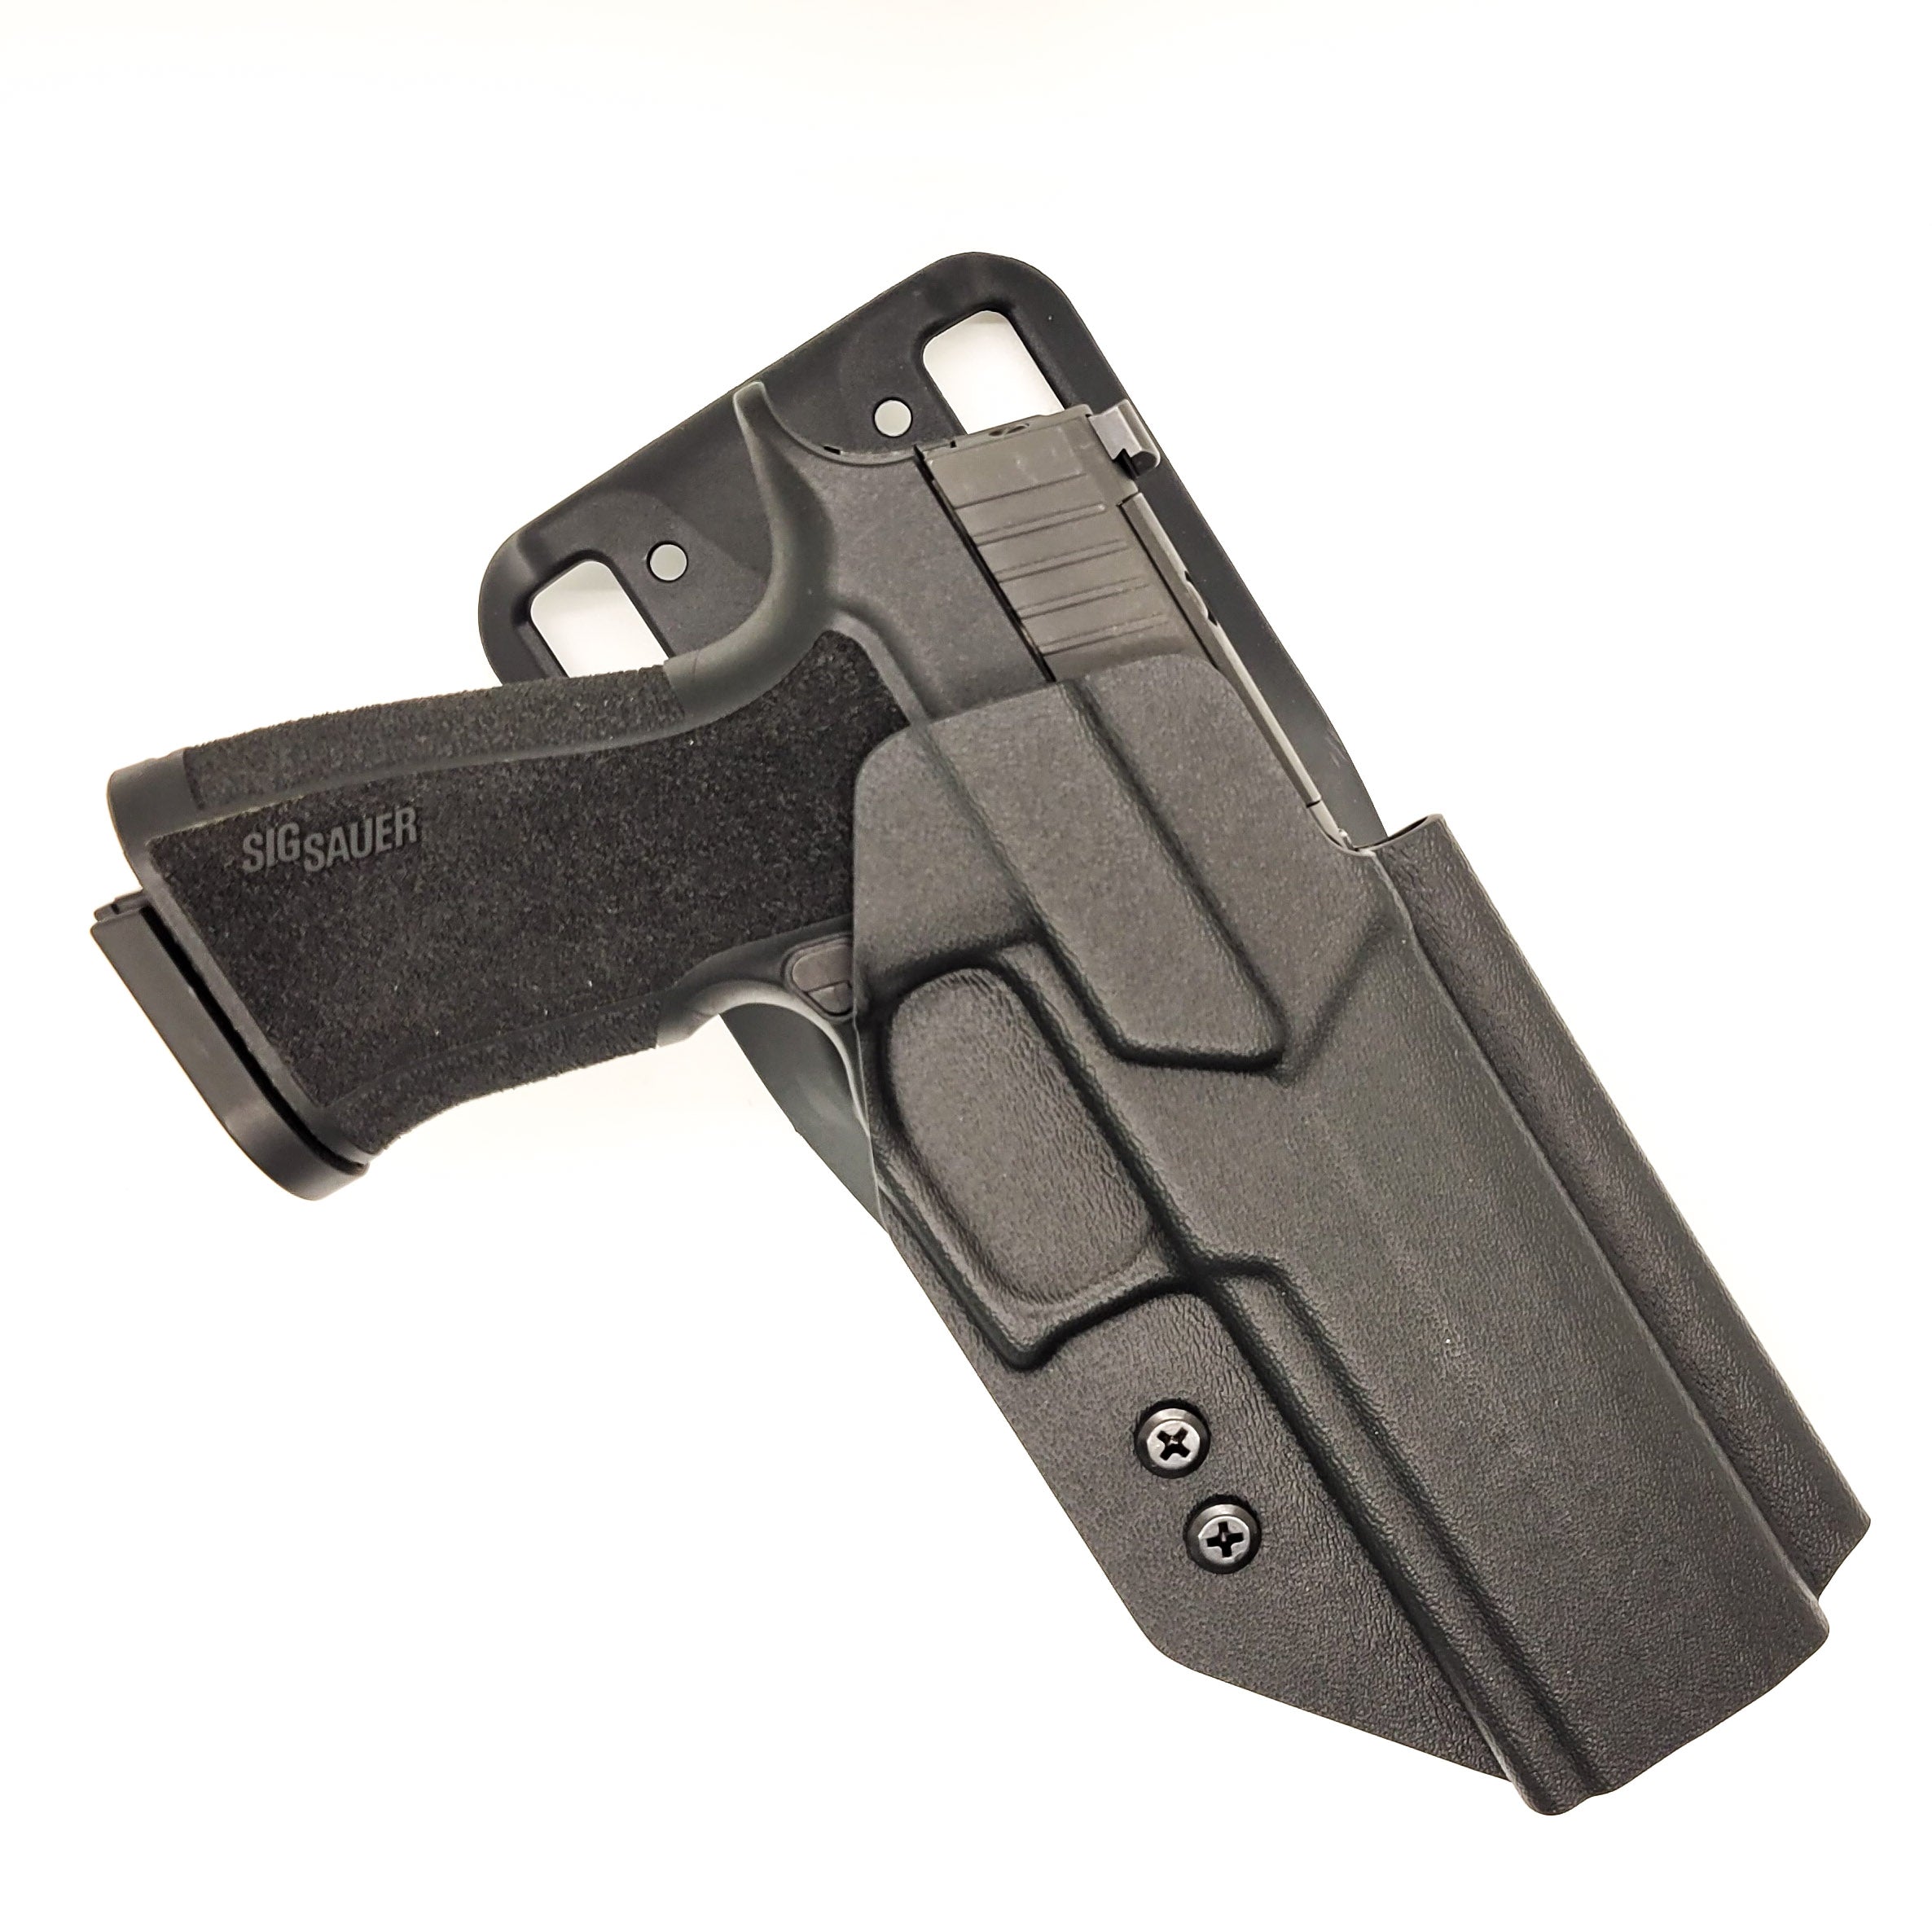 Outside Waistband Duty and Competition Style Holster designed to fit the Sig Sauer P320-XTEN 10MM. The holster is designed to be used for hunting, competition and light duty carry. The retention of the holster is o the trigger guard and provides that "audible click" that Kydex holsters are famous for. 